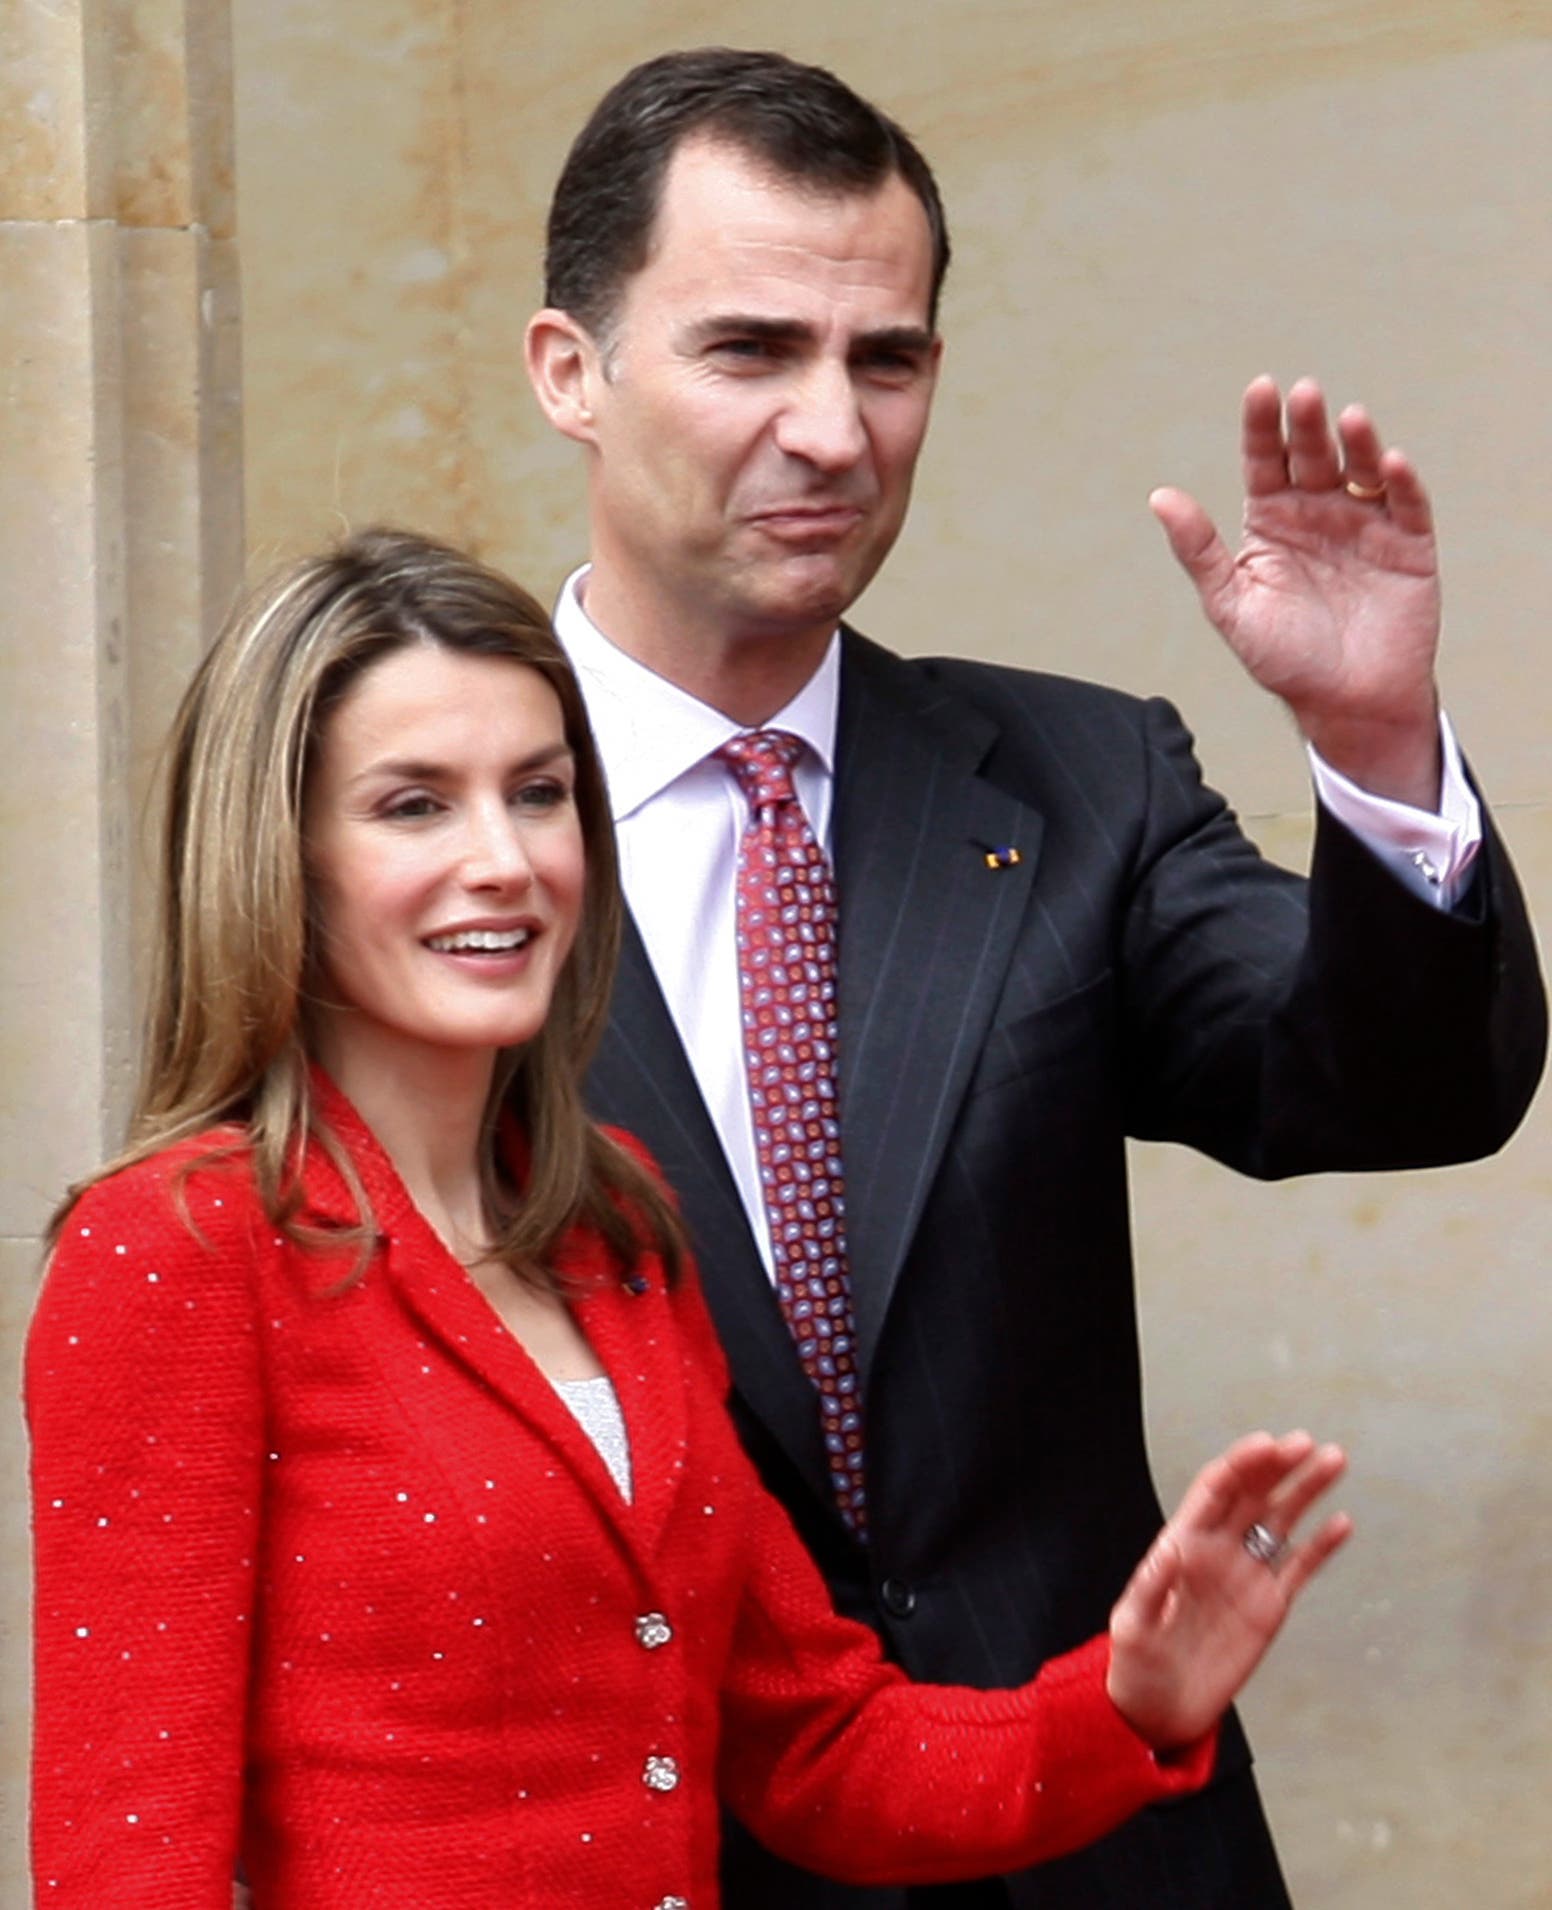 Spain crown prince Felipe de Borbon and his wife princess Letizia Ortiz wave during a ceremony at Narino Palace in Bogota May 27, 2009. (Reuters)